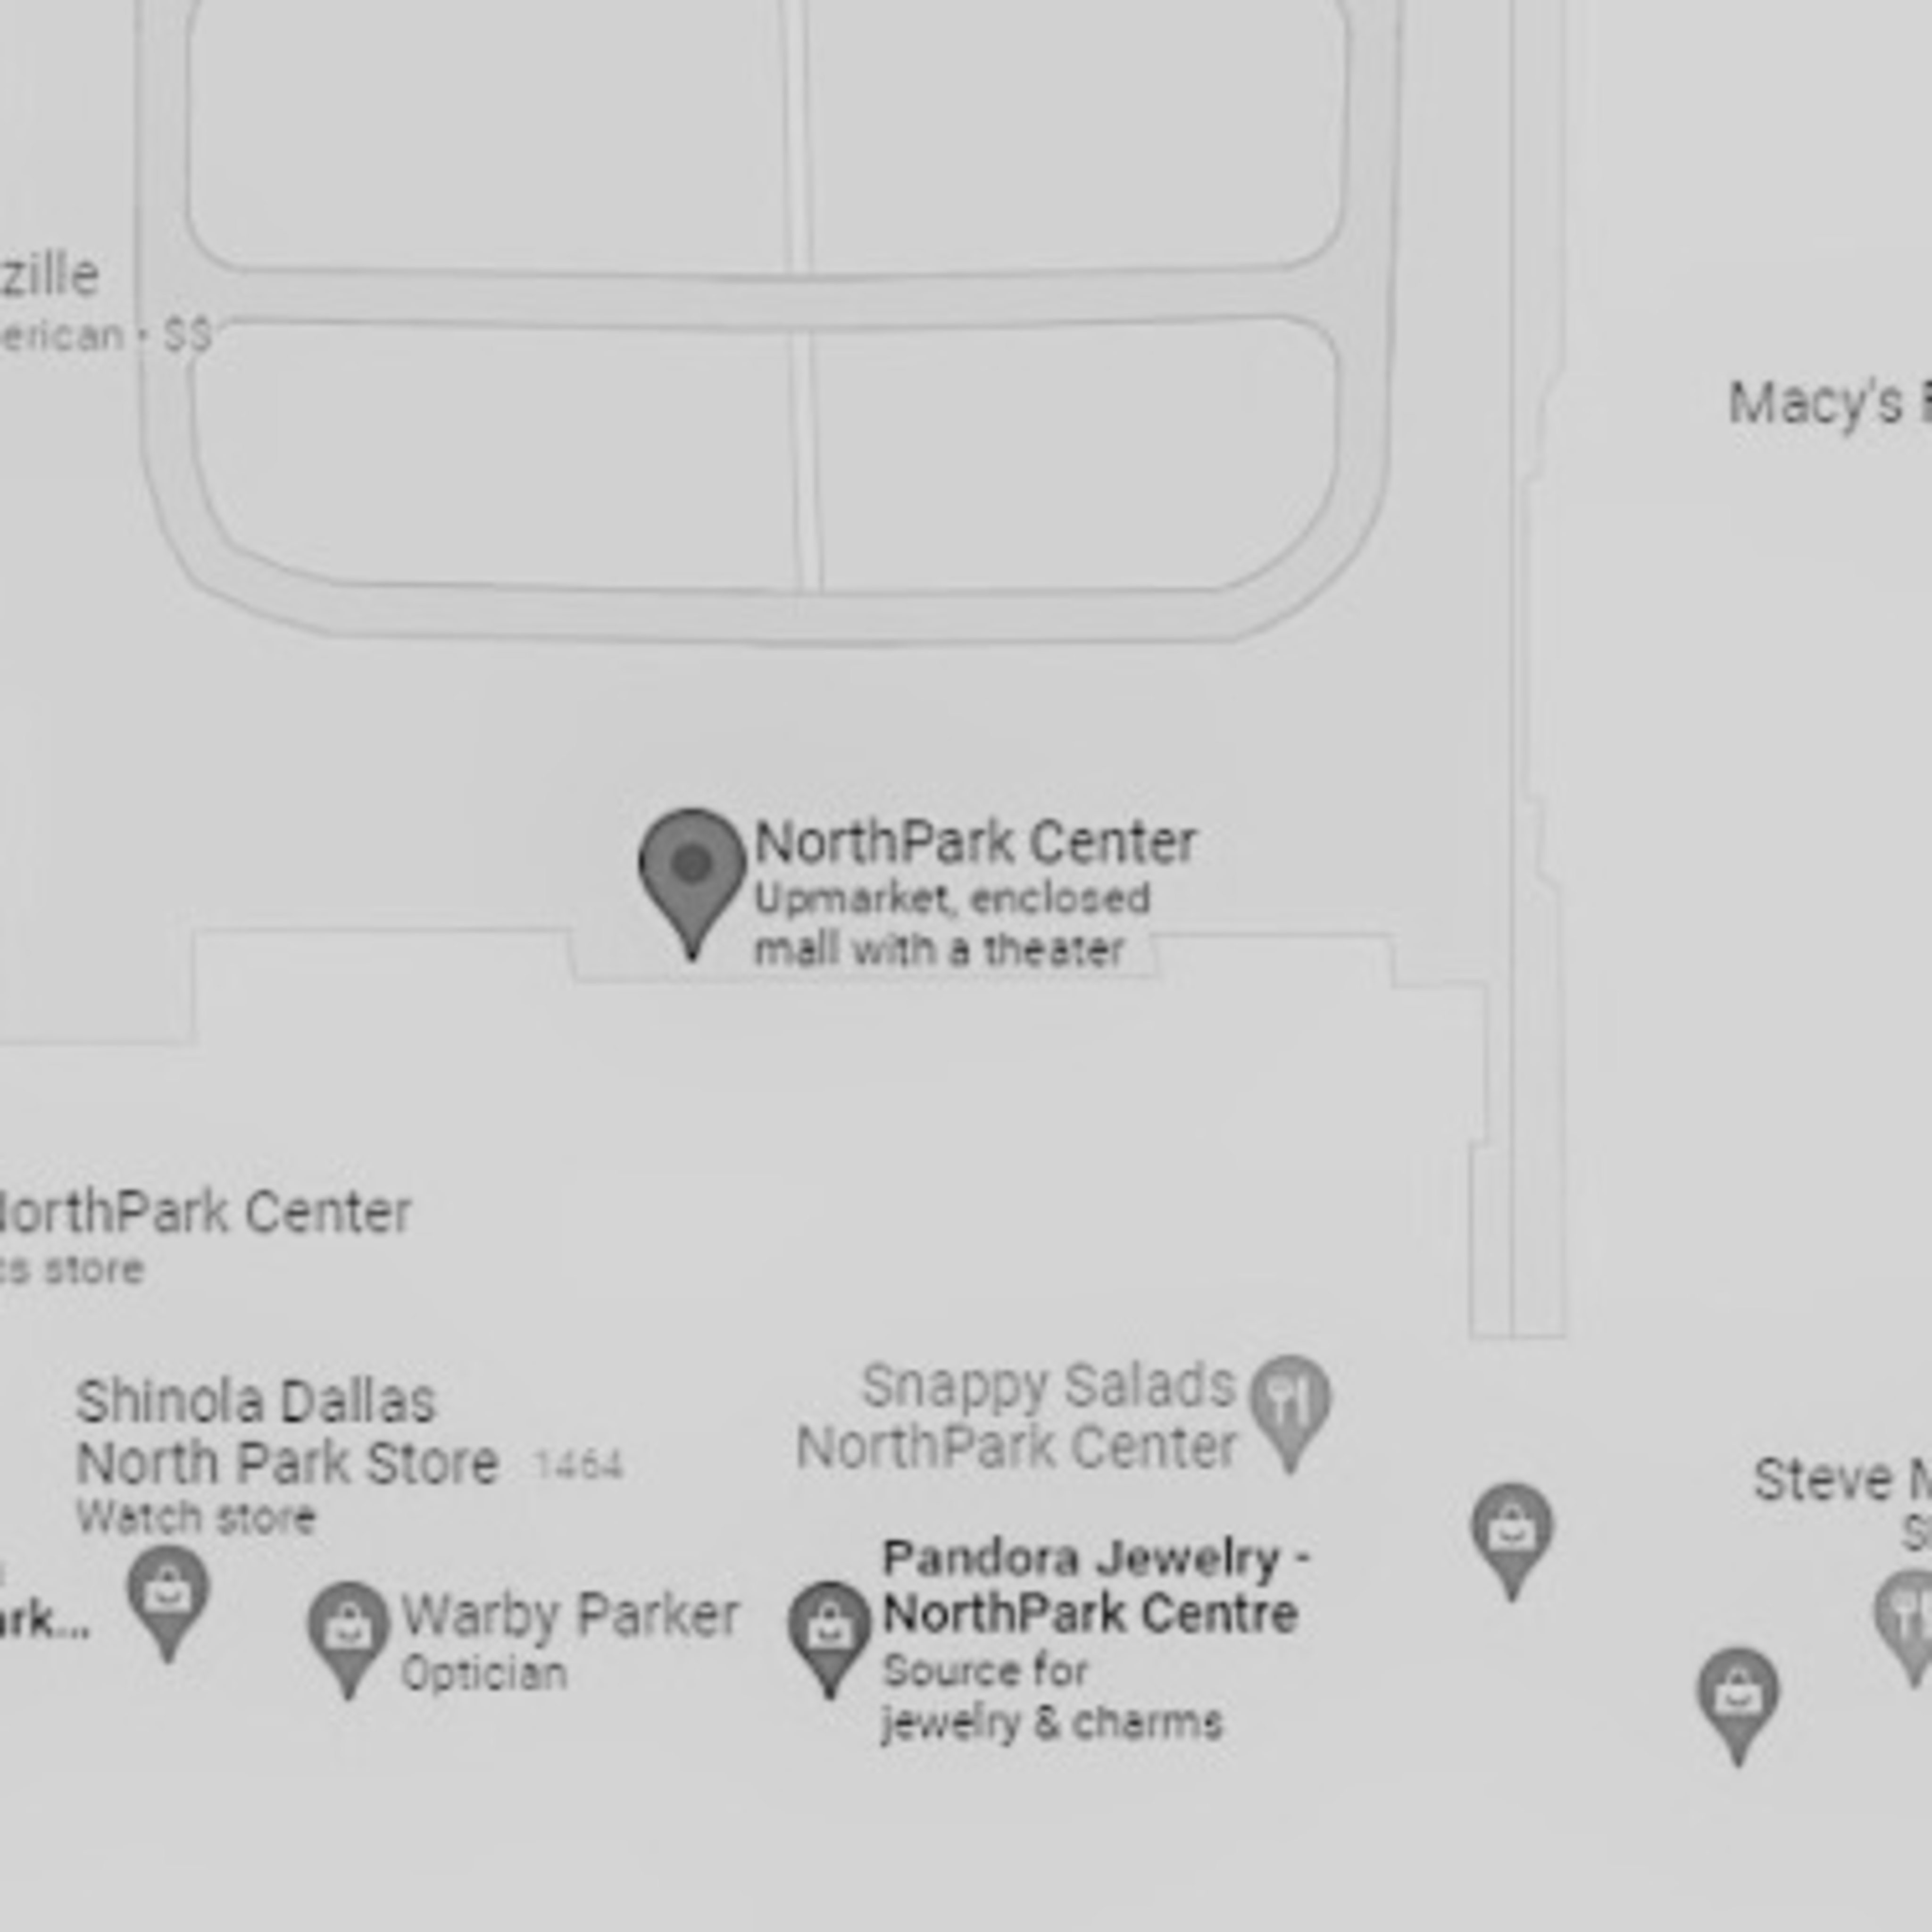 Directions from NorthPark Center to Dr. Flanagin's Office Dallas TX